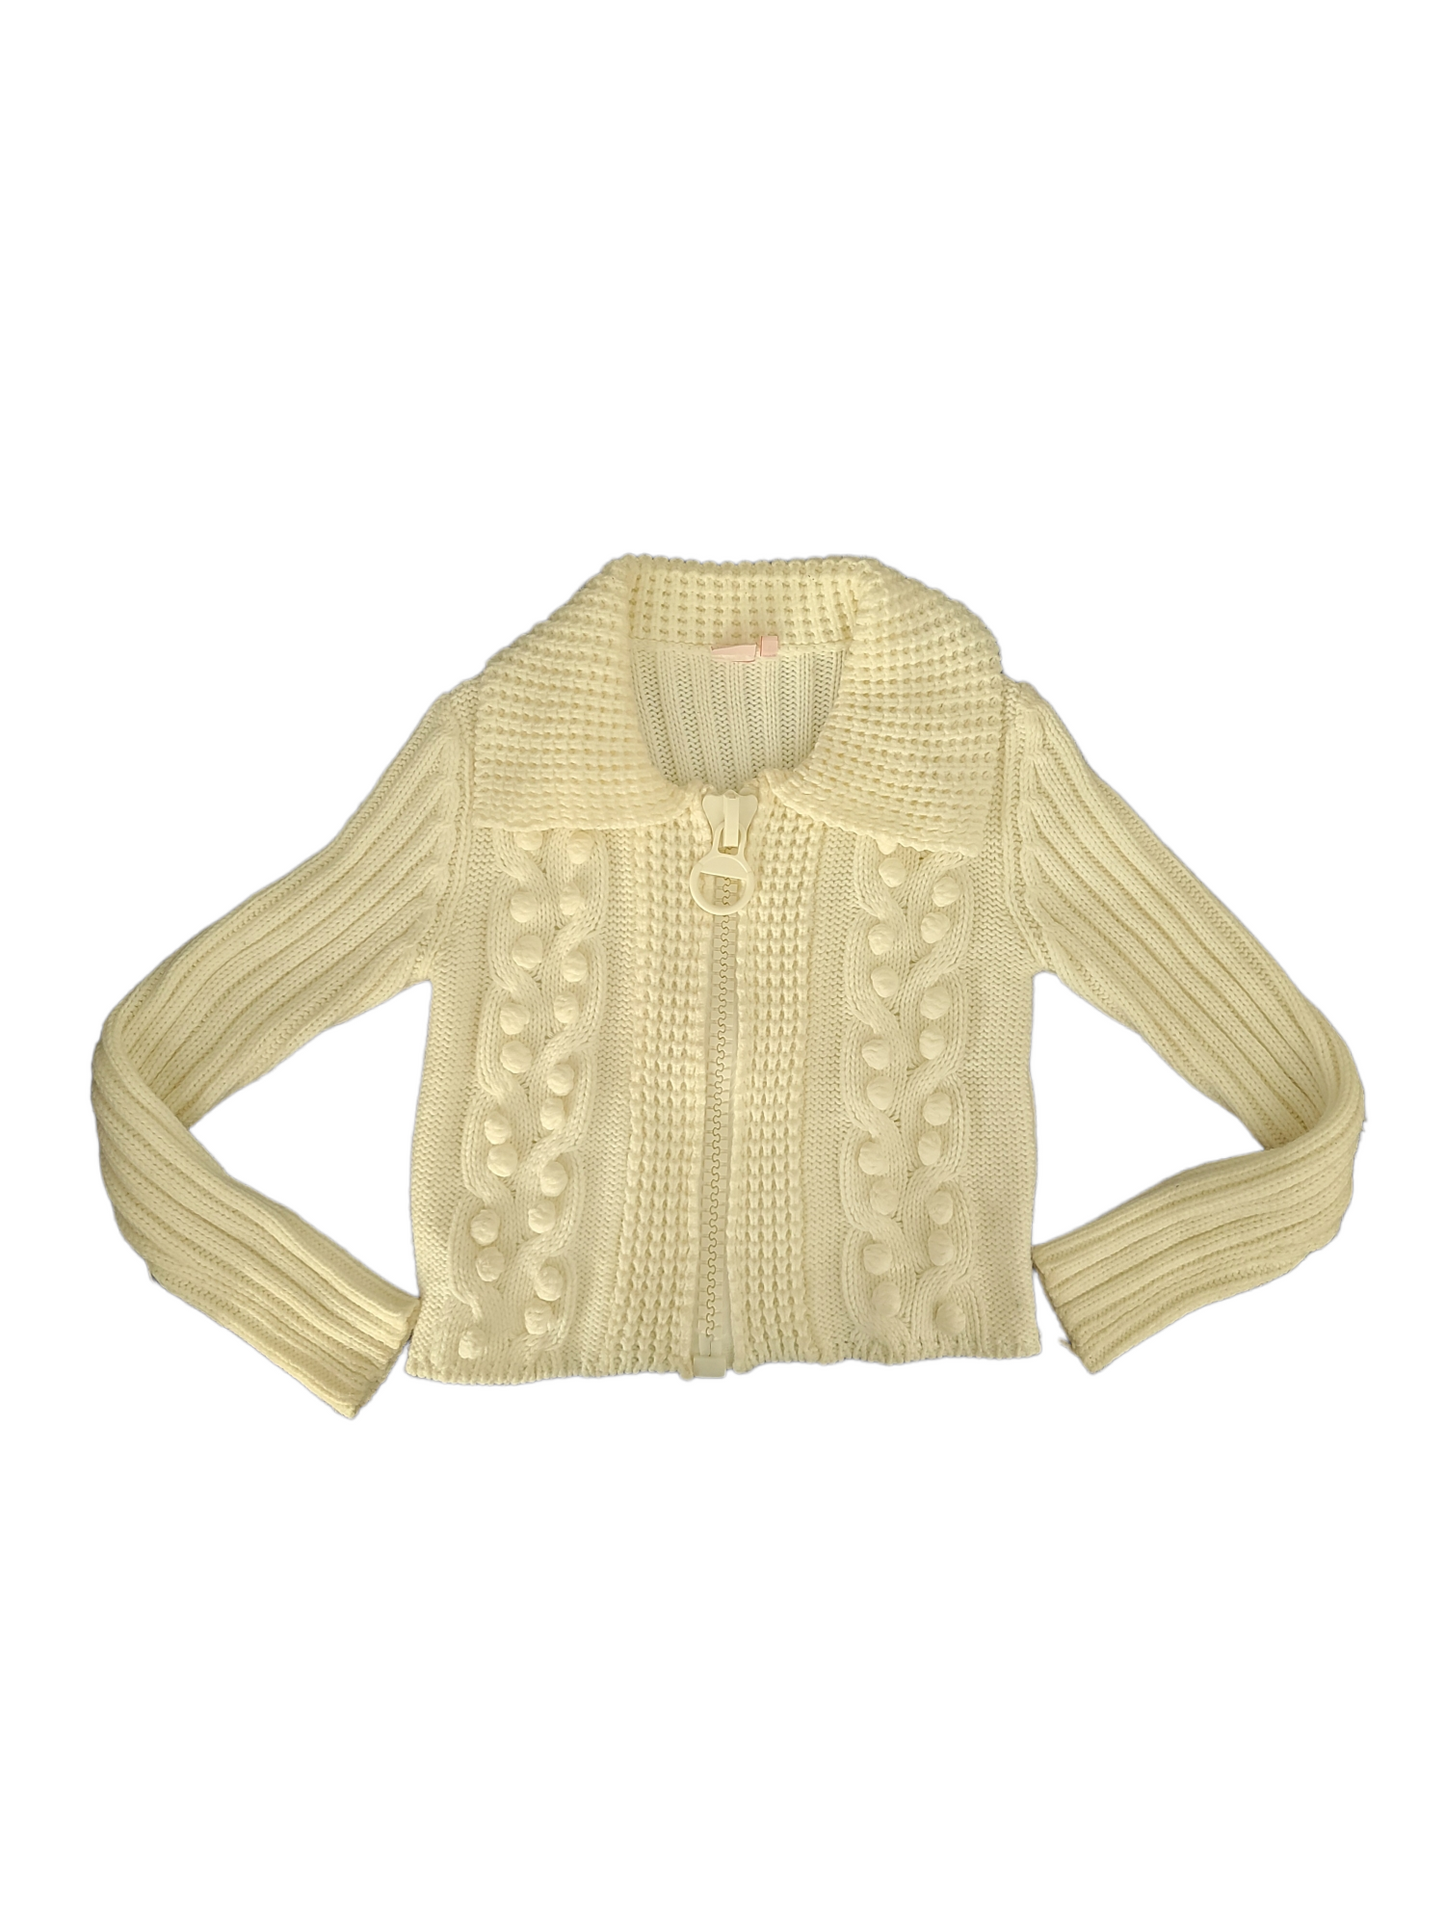 Ribbed sweater crochet knitted y2k cybery2k vintage harajuku cardigan 